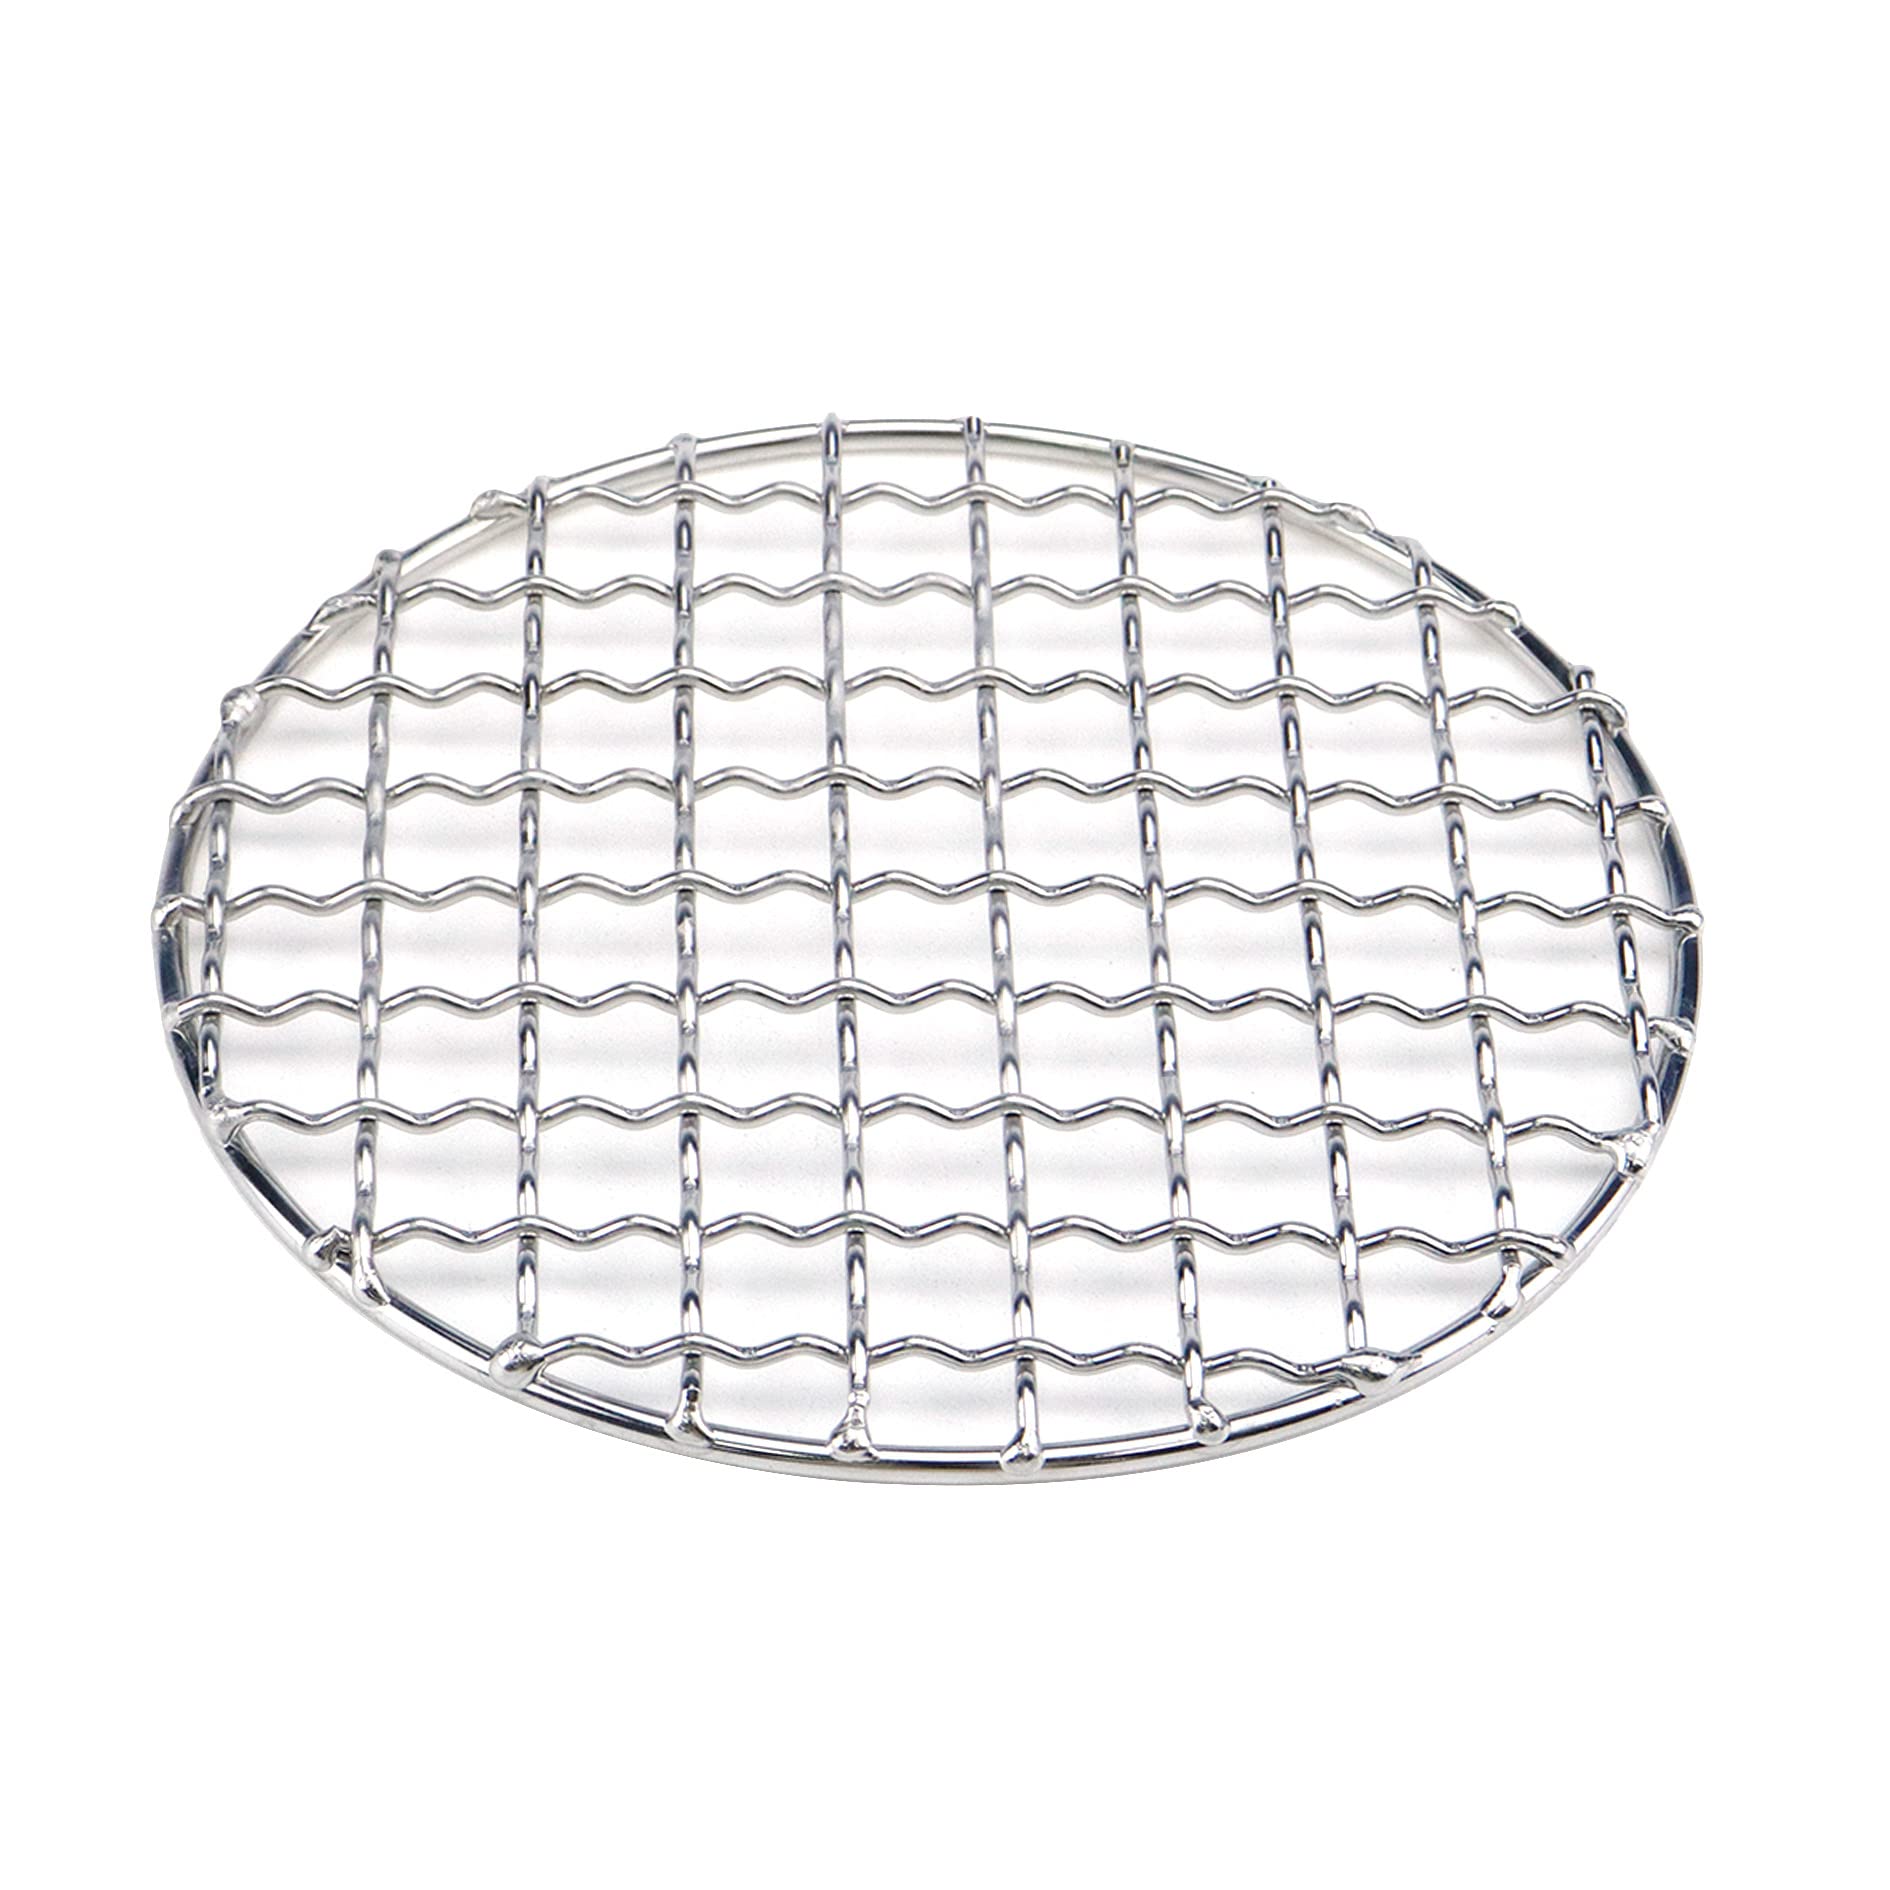 Pastlla Cooling Rack Stainless Steel Metal Wire Rack Barbecue Carbon Baking Net Grill Round Cooling Rack 130mm/5.12in